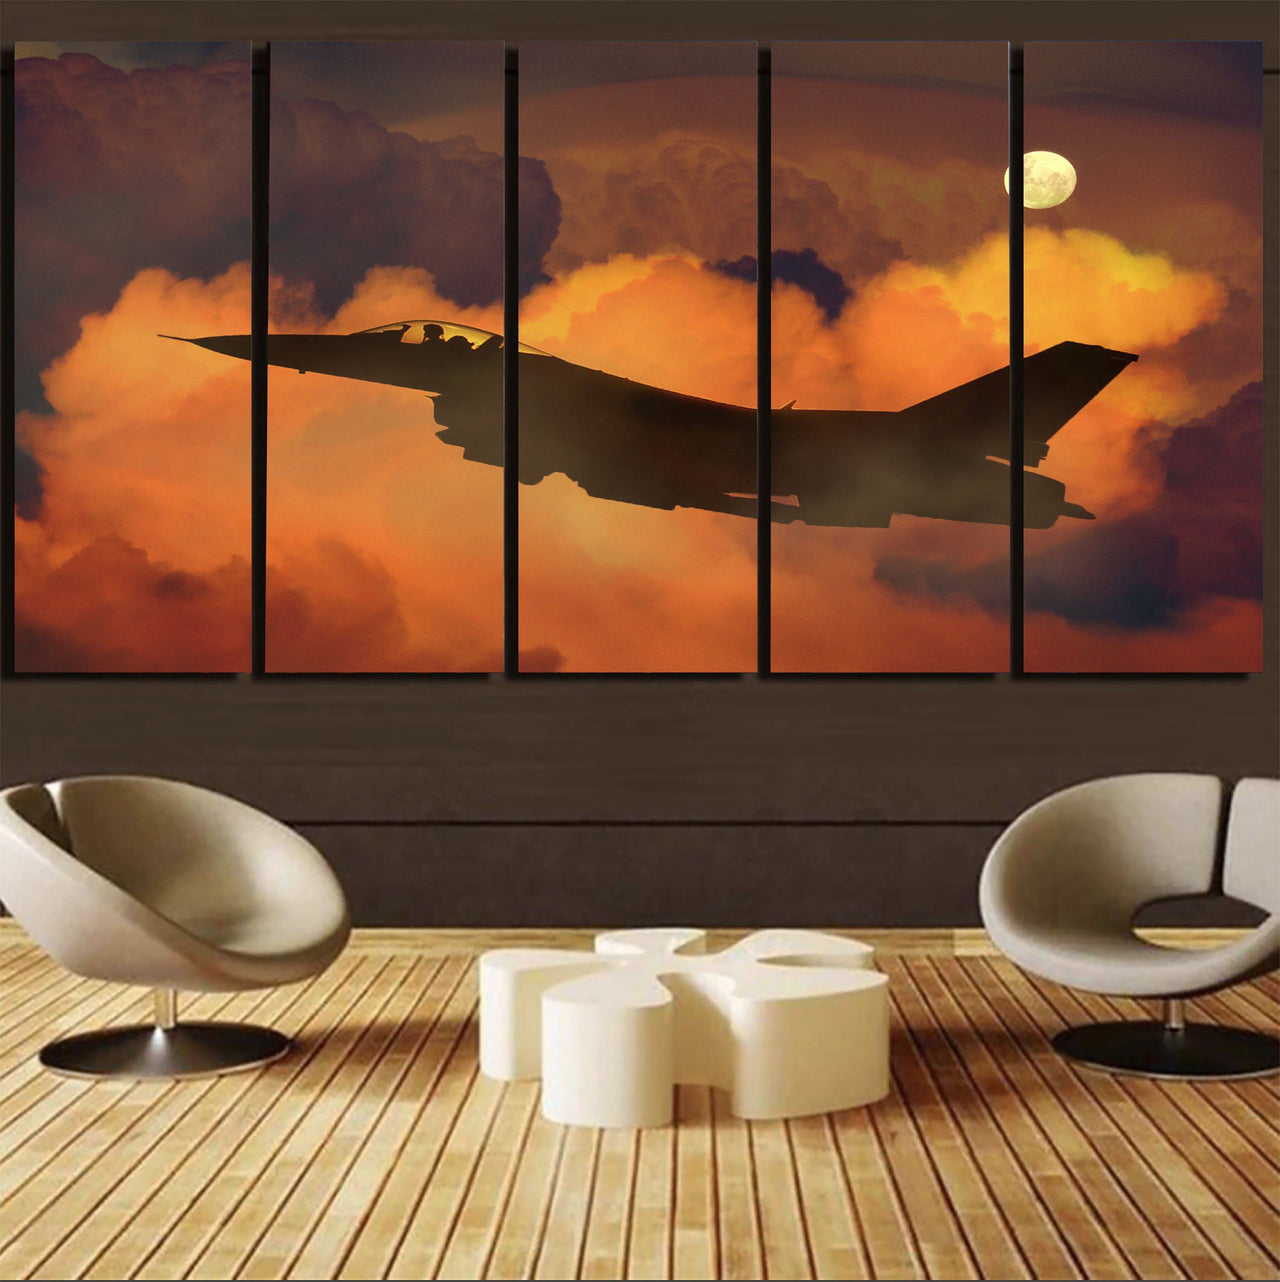 Departing Fighting Falcon F16 Printed Canvas Prints (5 Pieces) Aviation Shop 